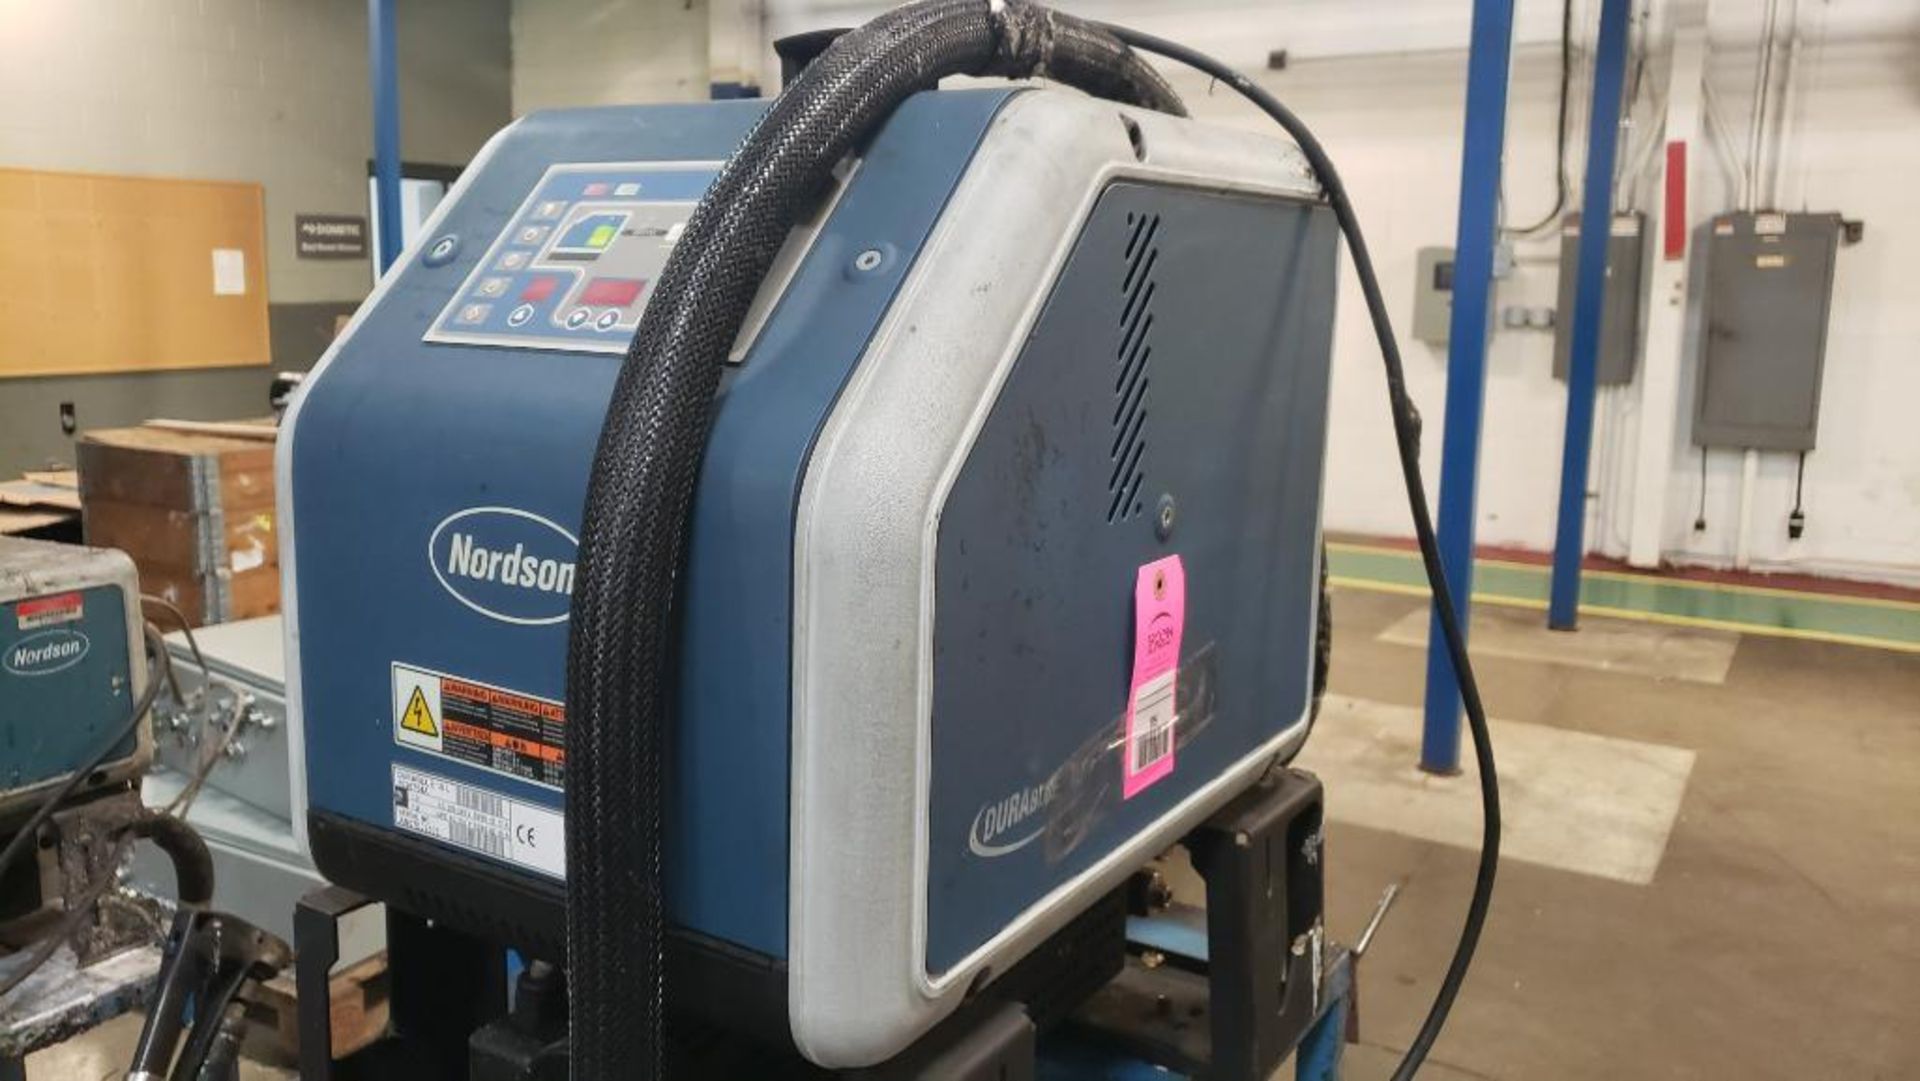 Nordson DuraBlue 10 adhesive dispensing system. 1026754A.